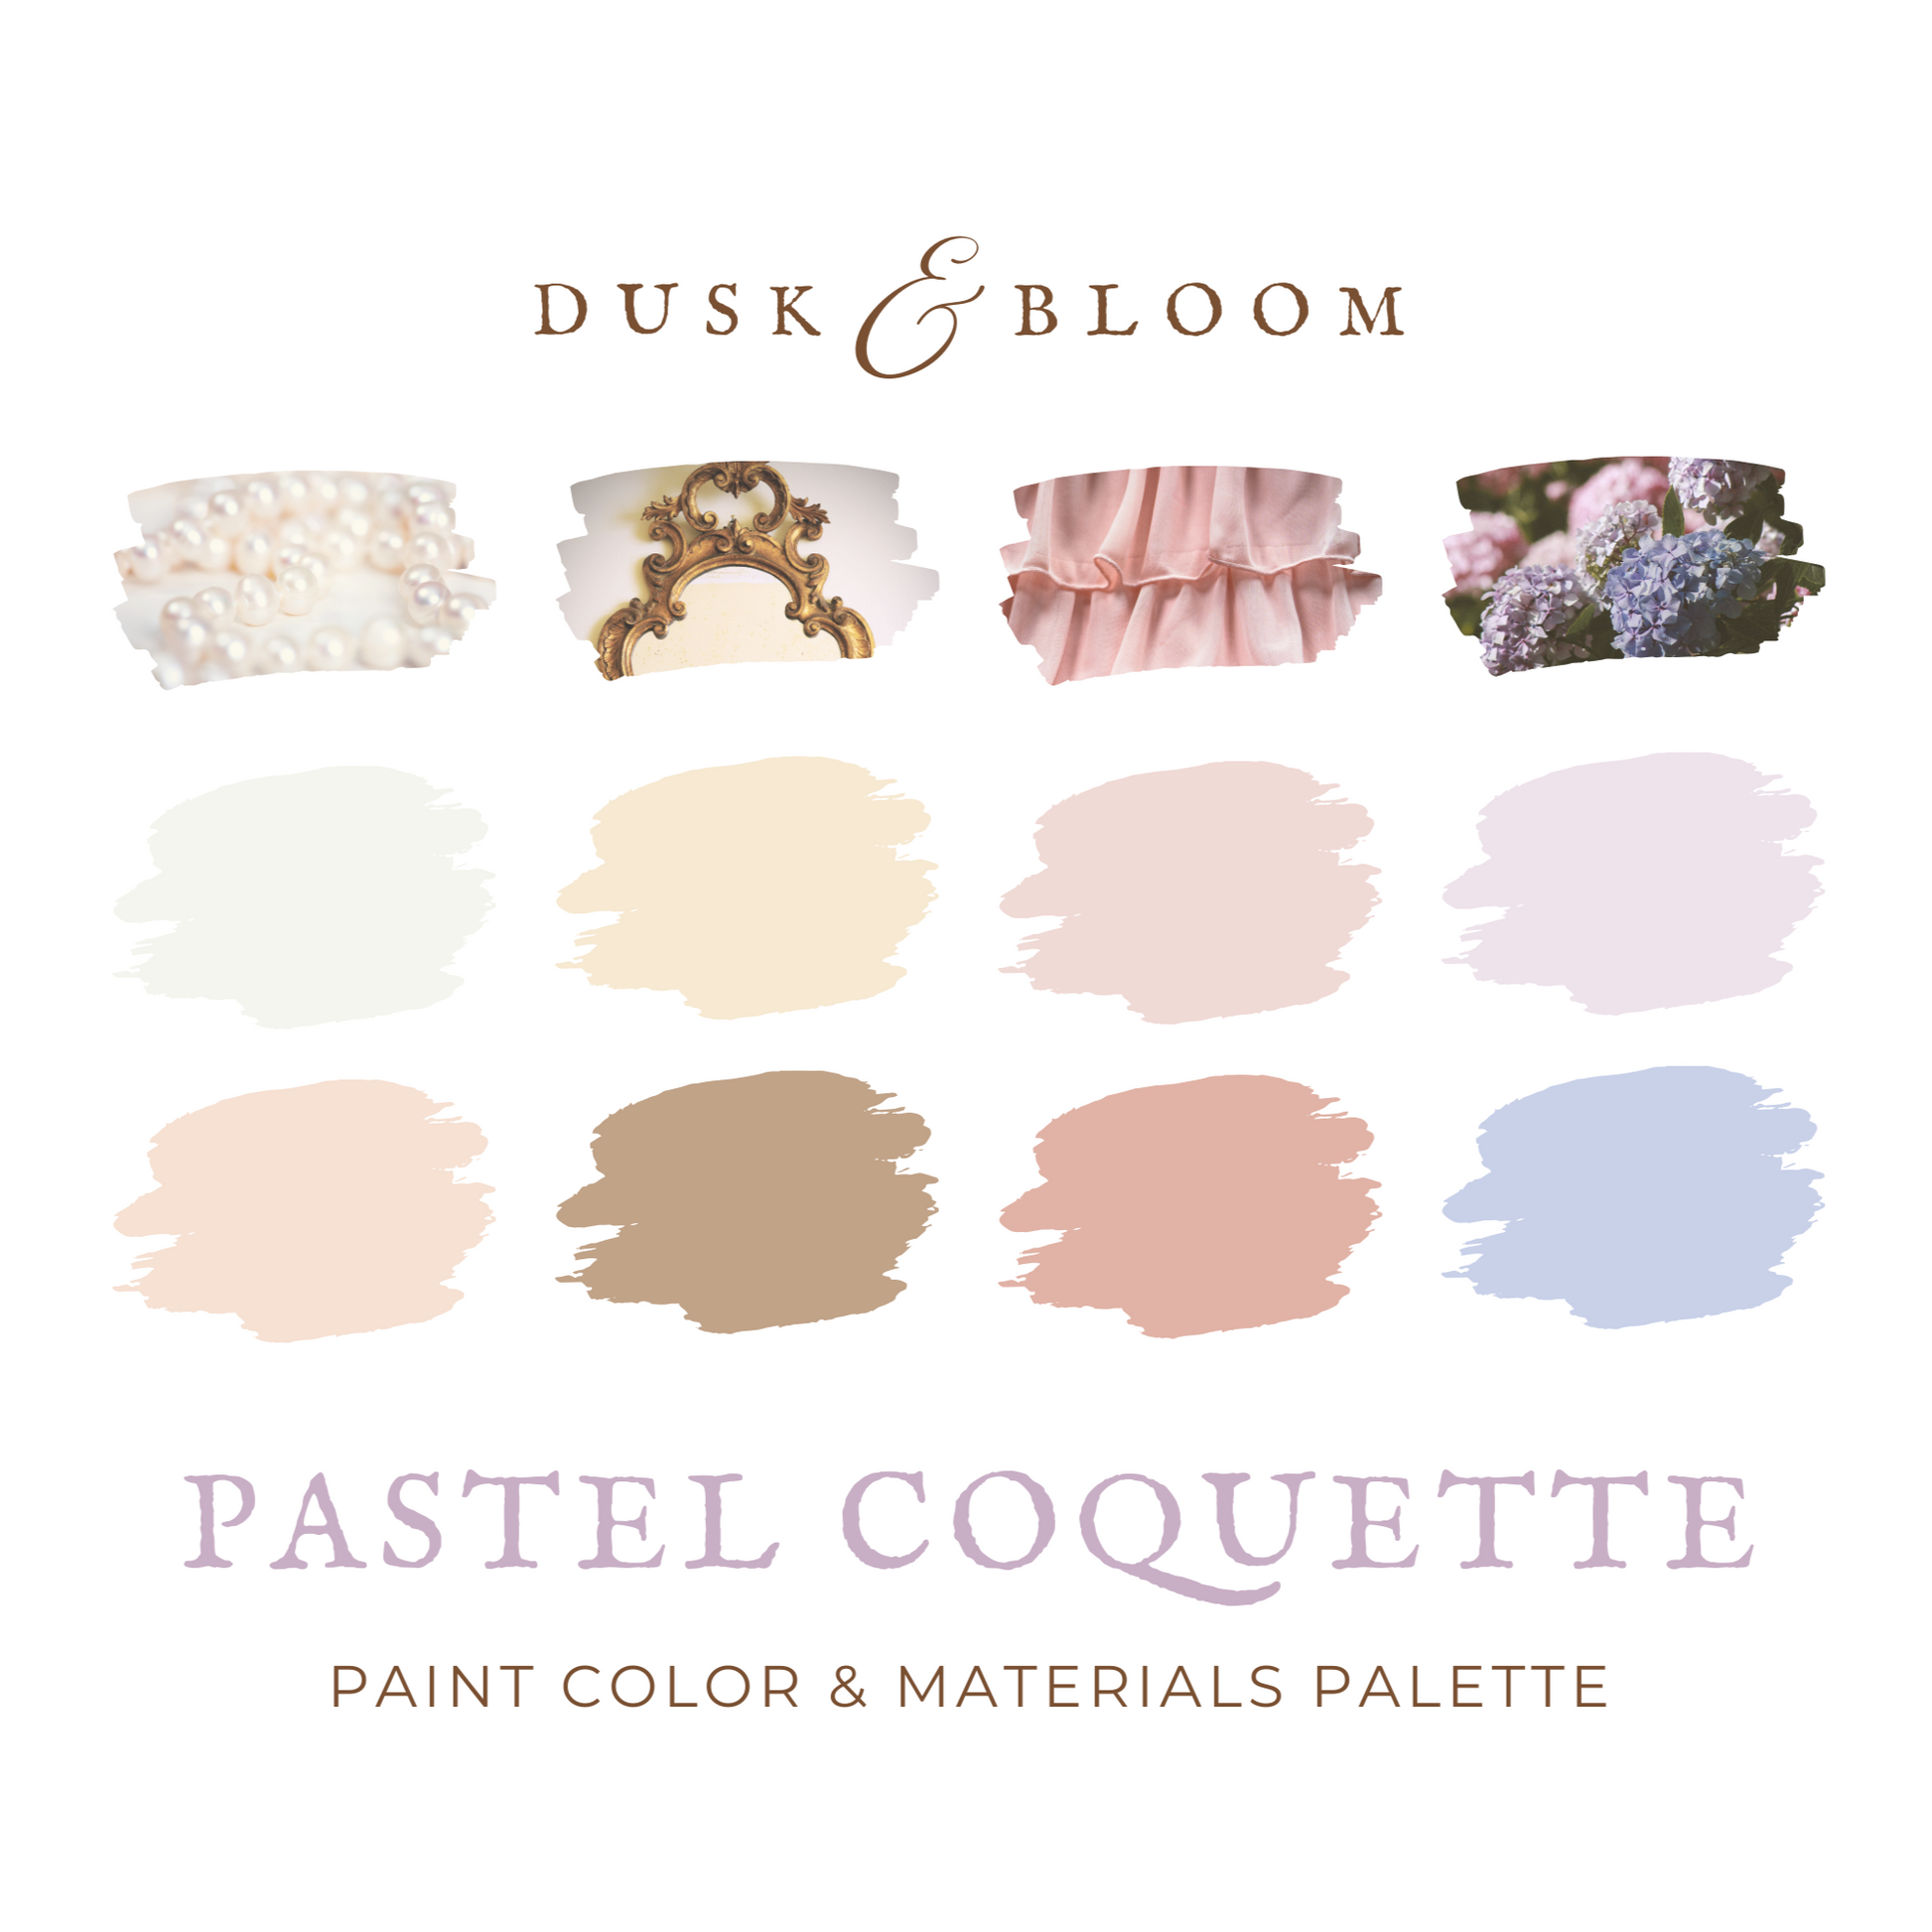 Style Guide: Coquette Aesthetic, Blog